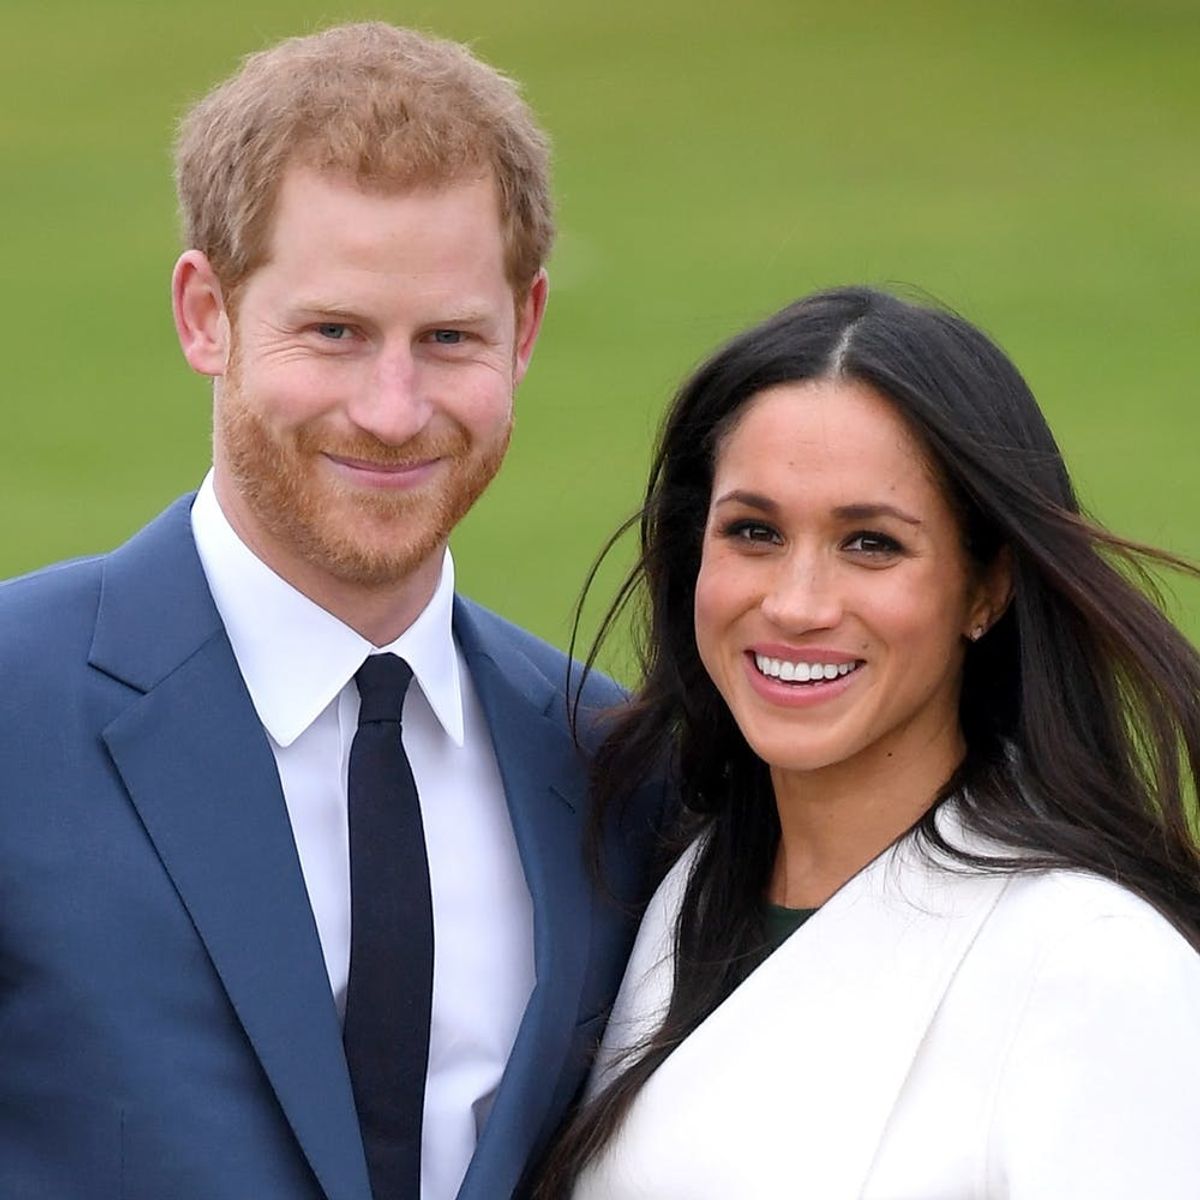 1 Hashtag to Follow During Prince Harry and Meghan Markle’s Wedding